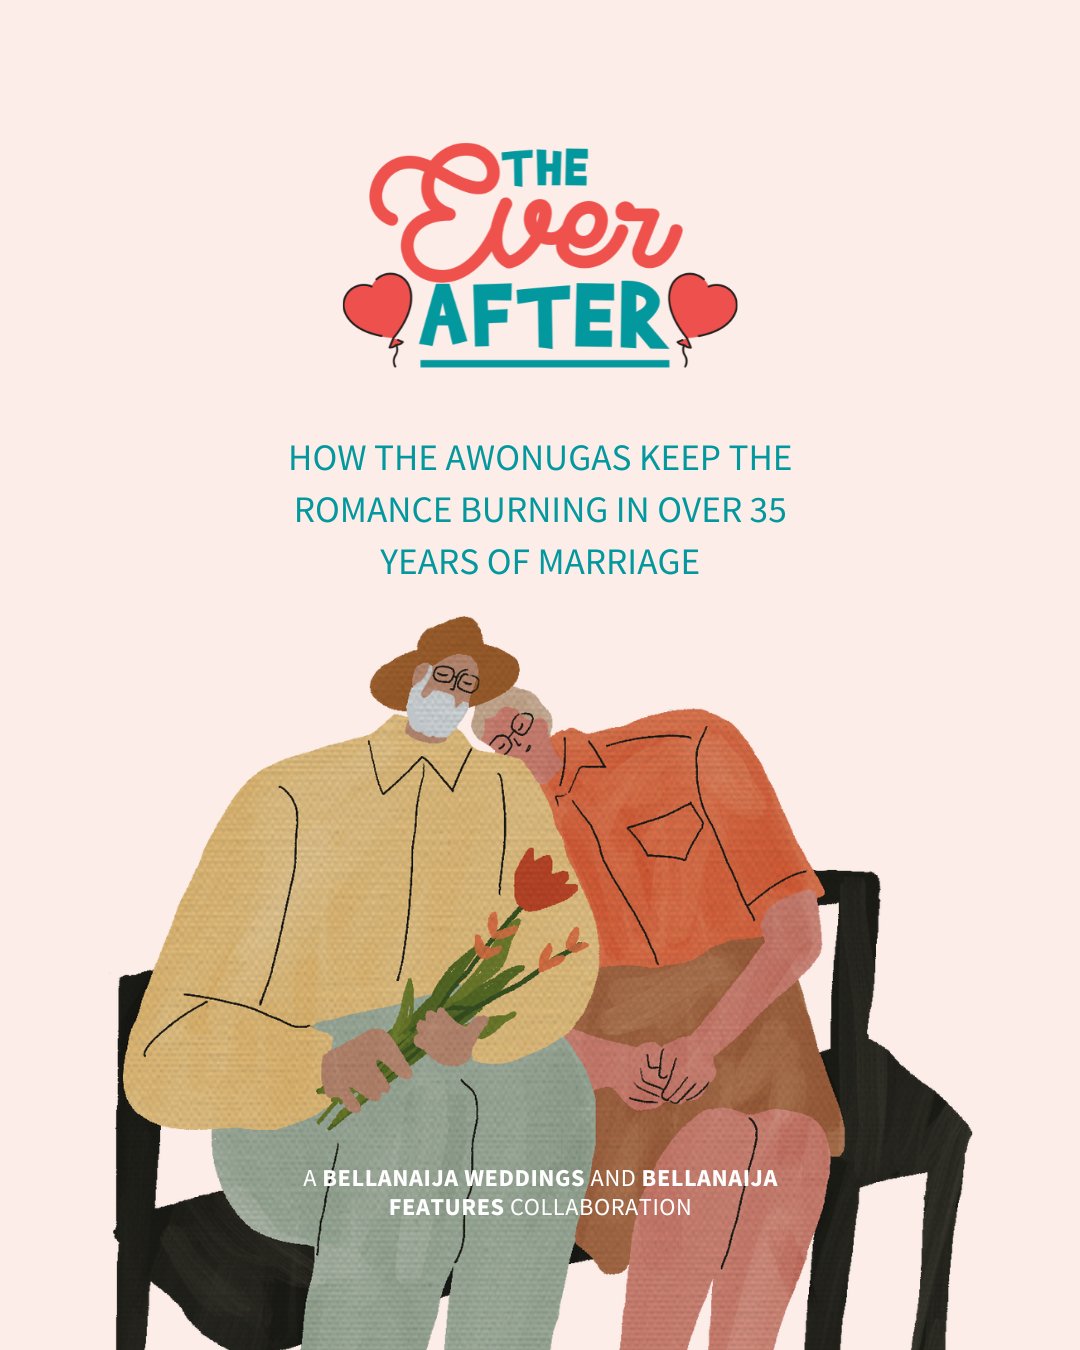 #TheEverAfterSeries: How The Awonugas Maintain The Romance Burning in Over 35 Years of Marriage